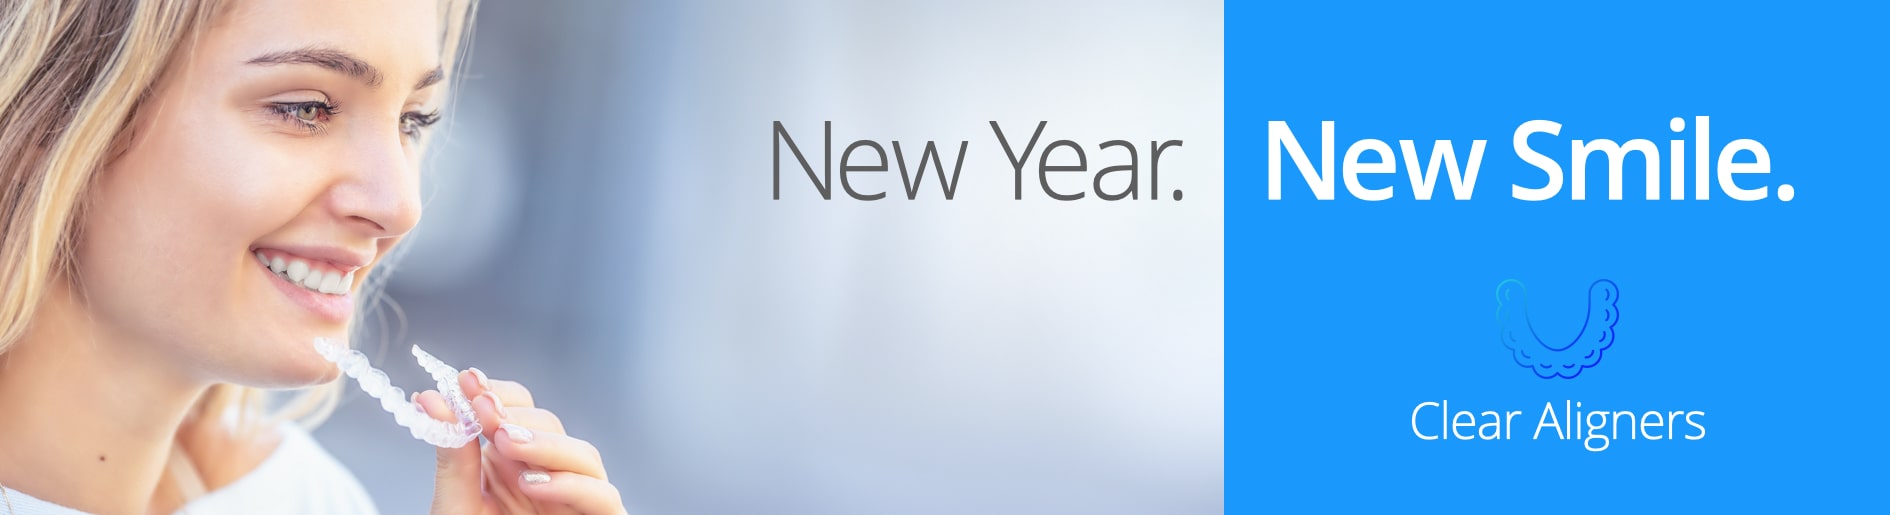 new year, new smile - schedule clear aligner appointment